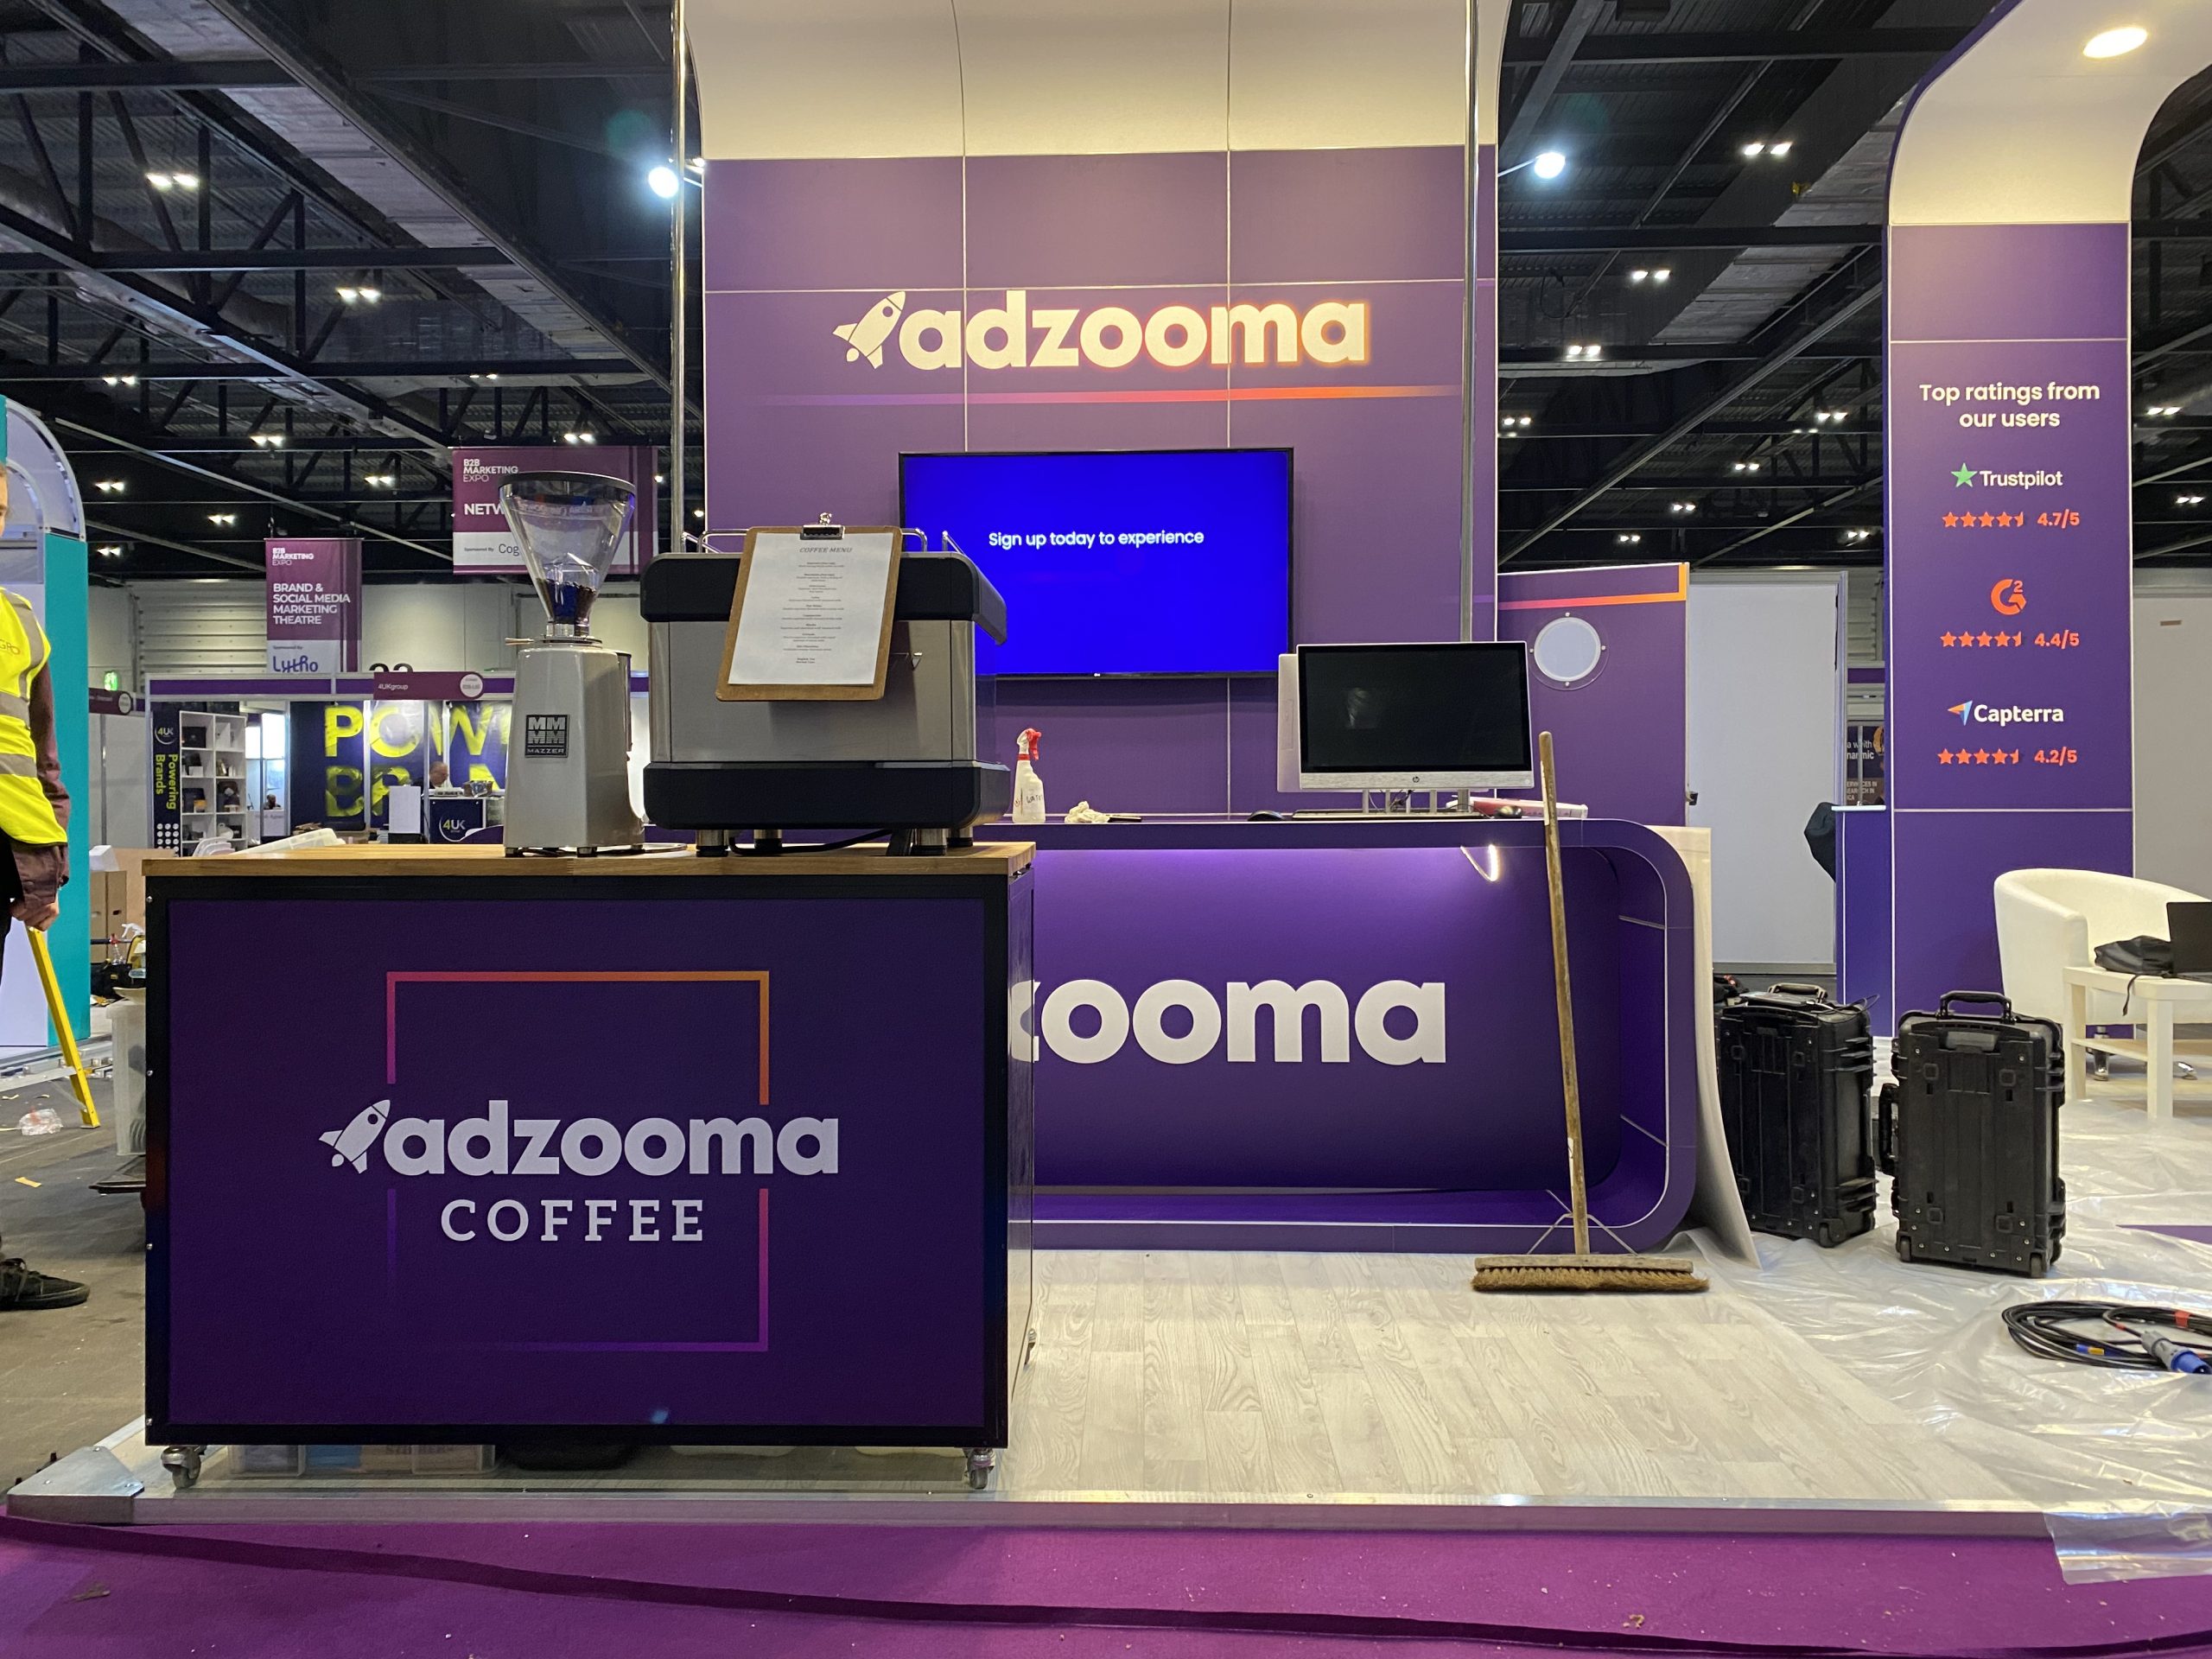 Photos of The Mobile Coffee Bean Adzooma branded coffee bar for exhibitions